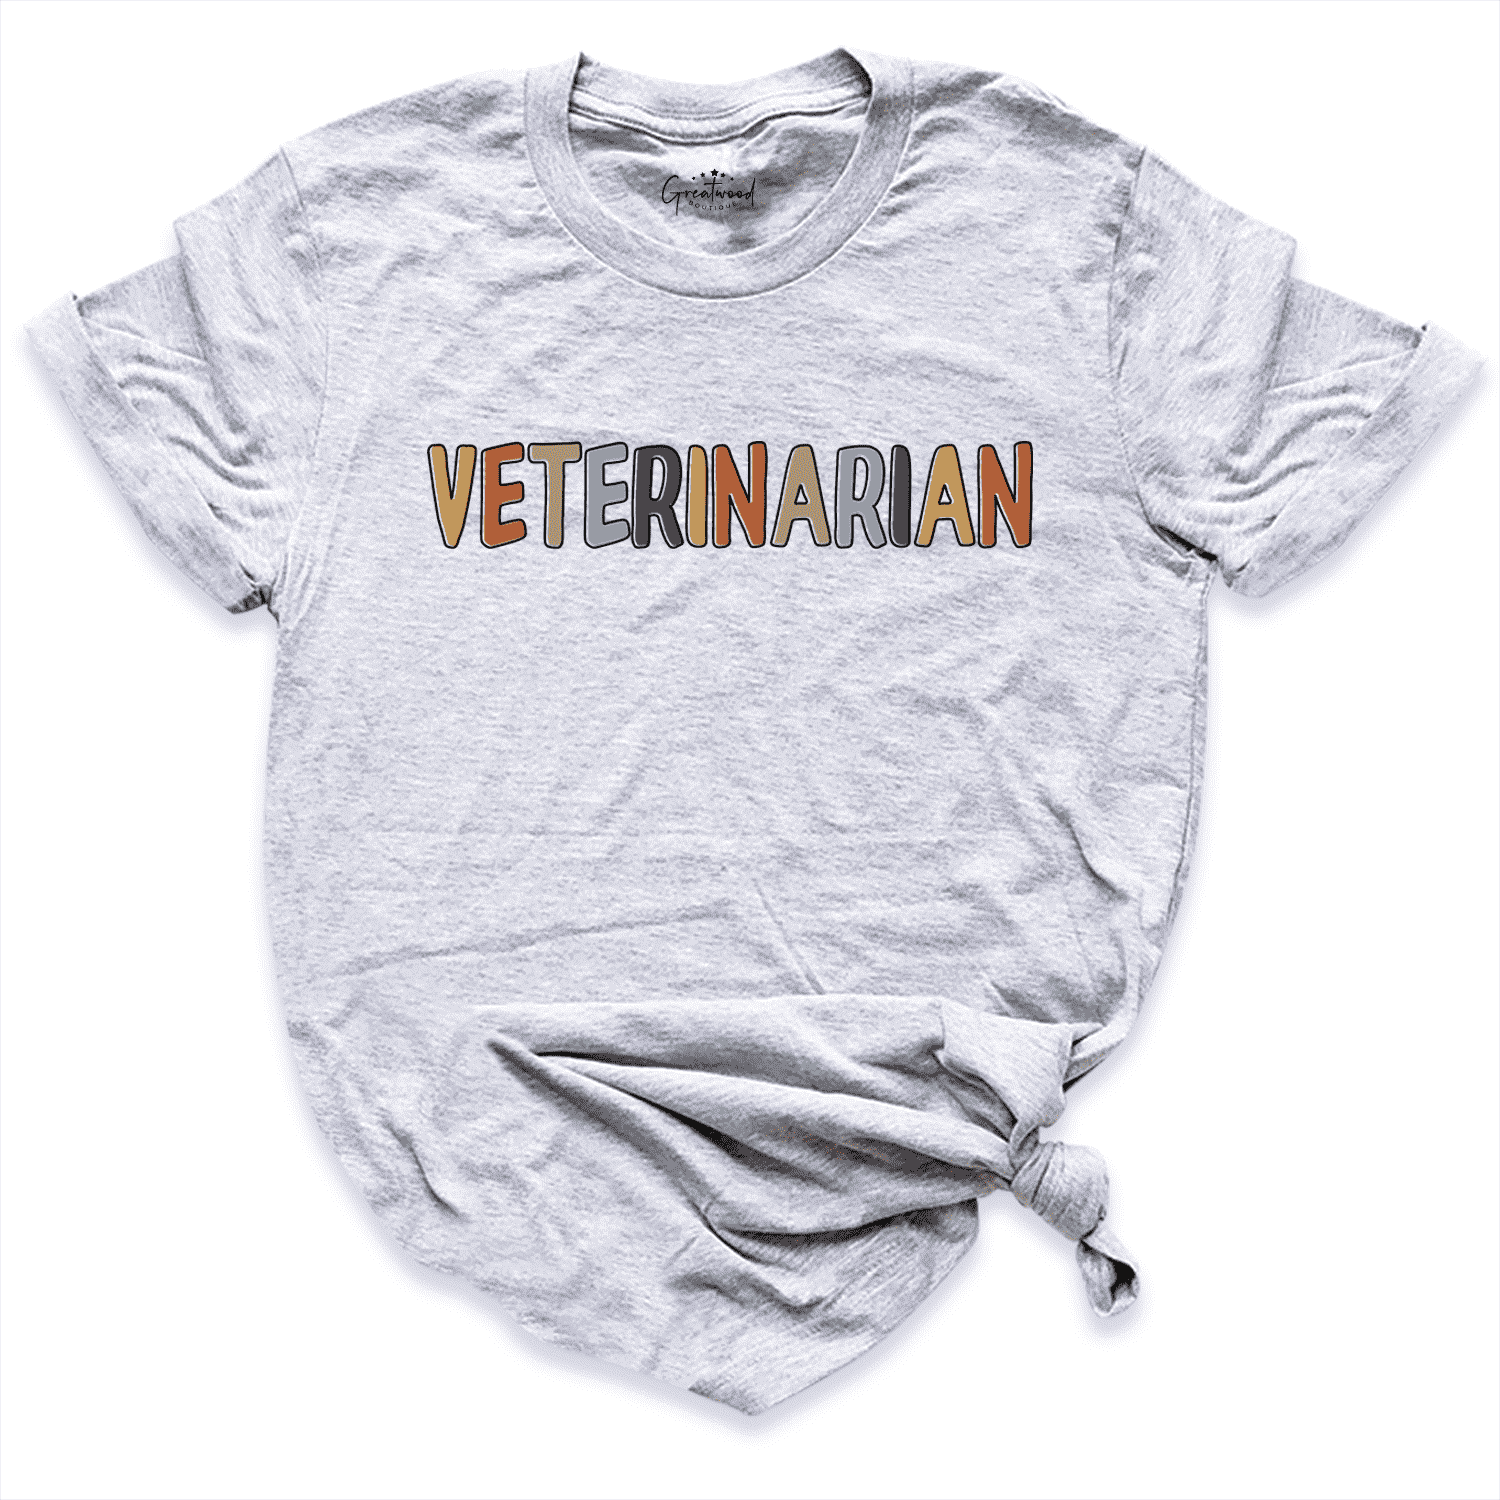 Veterinarian Shirt Grey - Greatwood Boutique